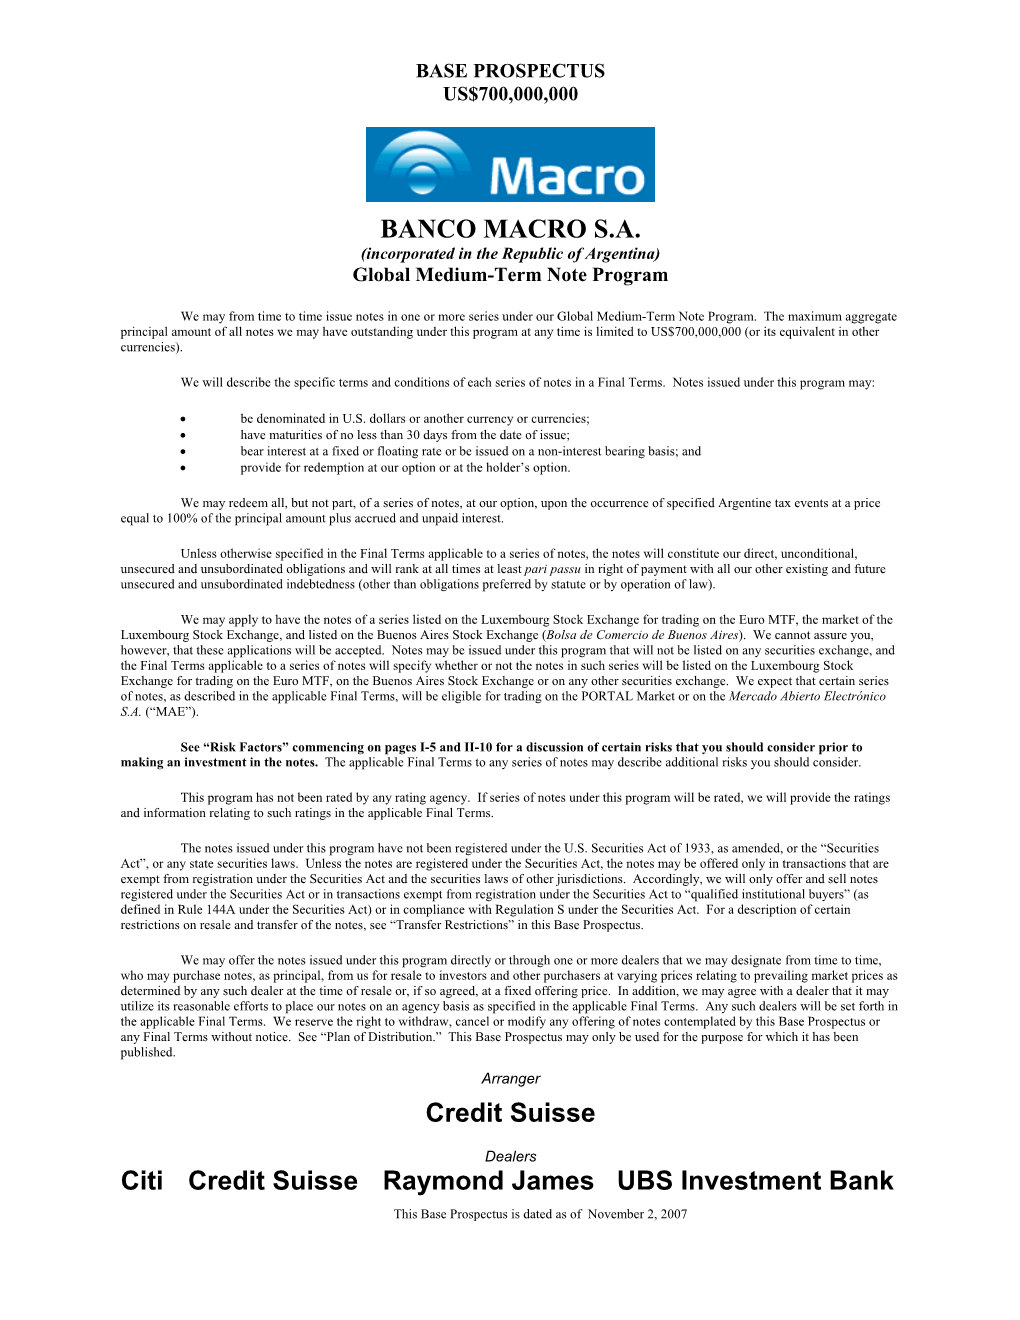 BANCO MACRO S.A. (Incorporated in the Republic of Argentina) Global Medium-Term Note Program